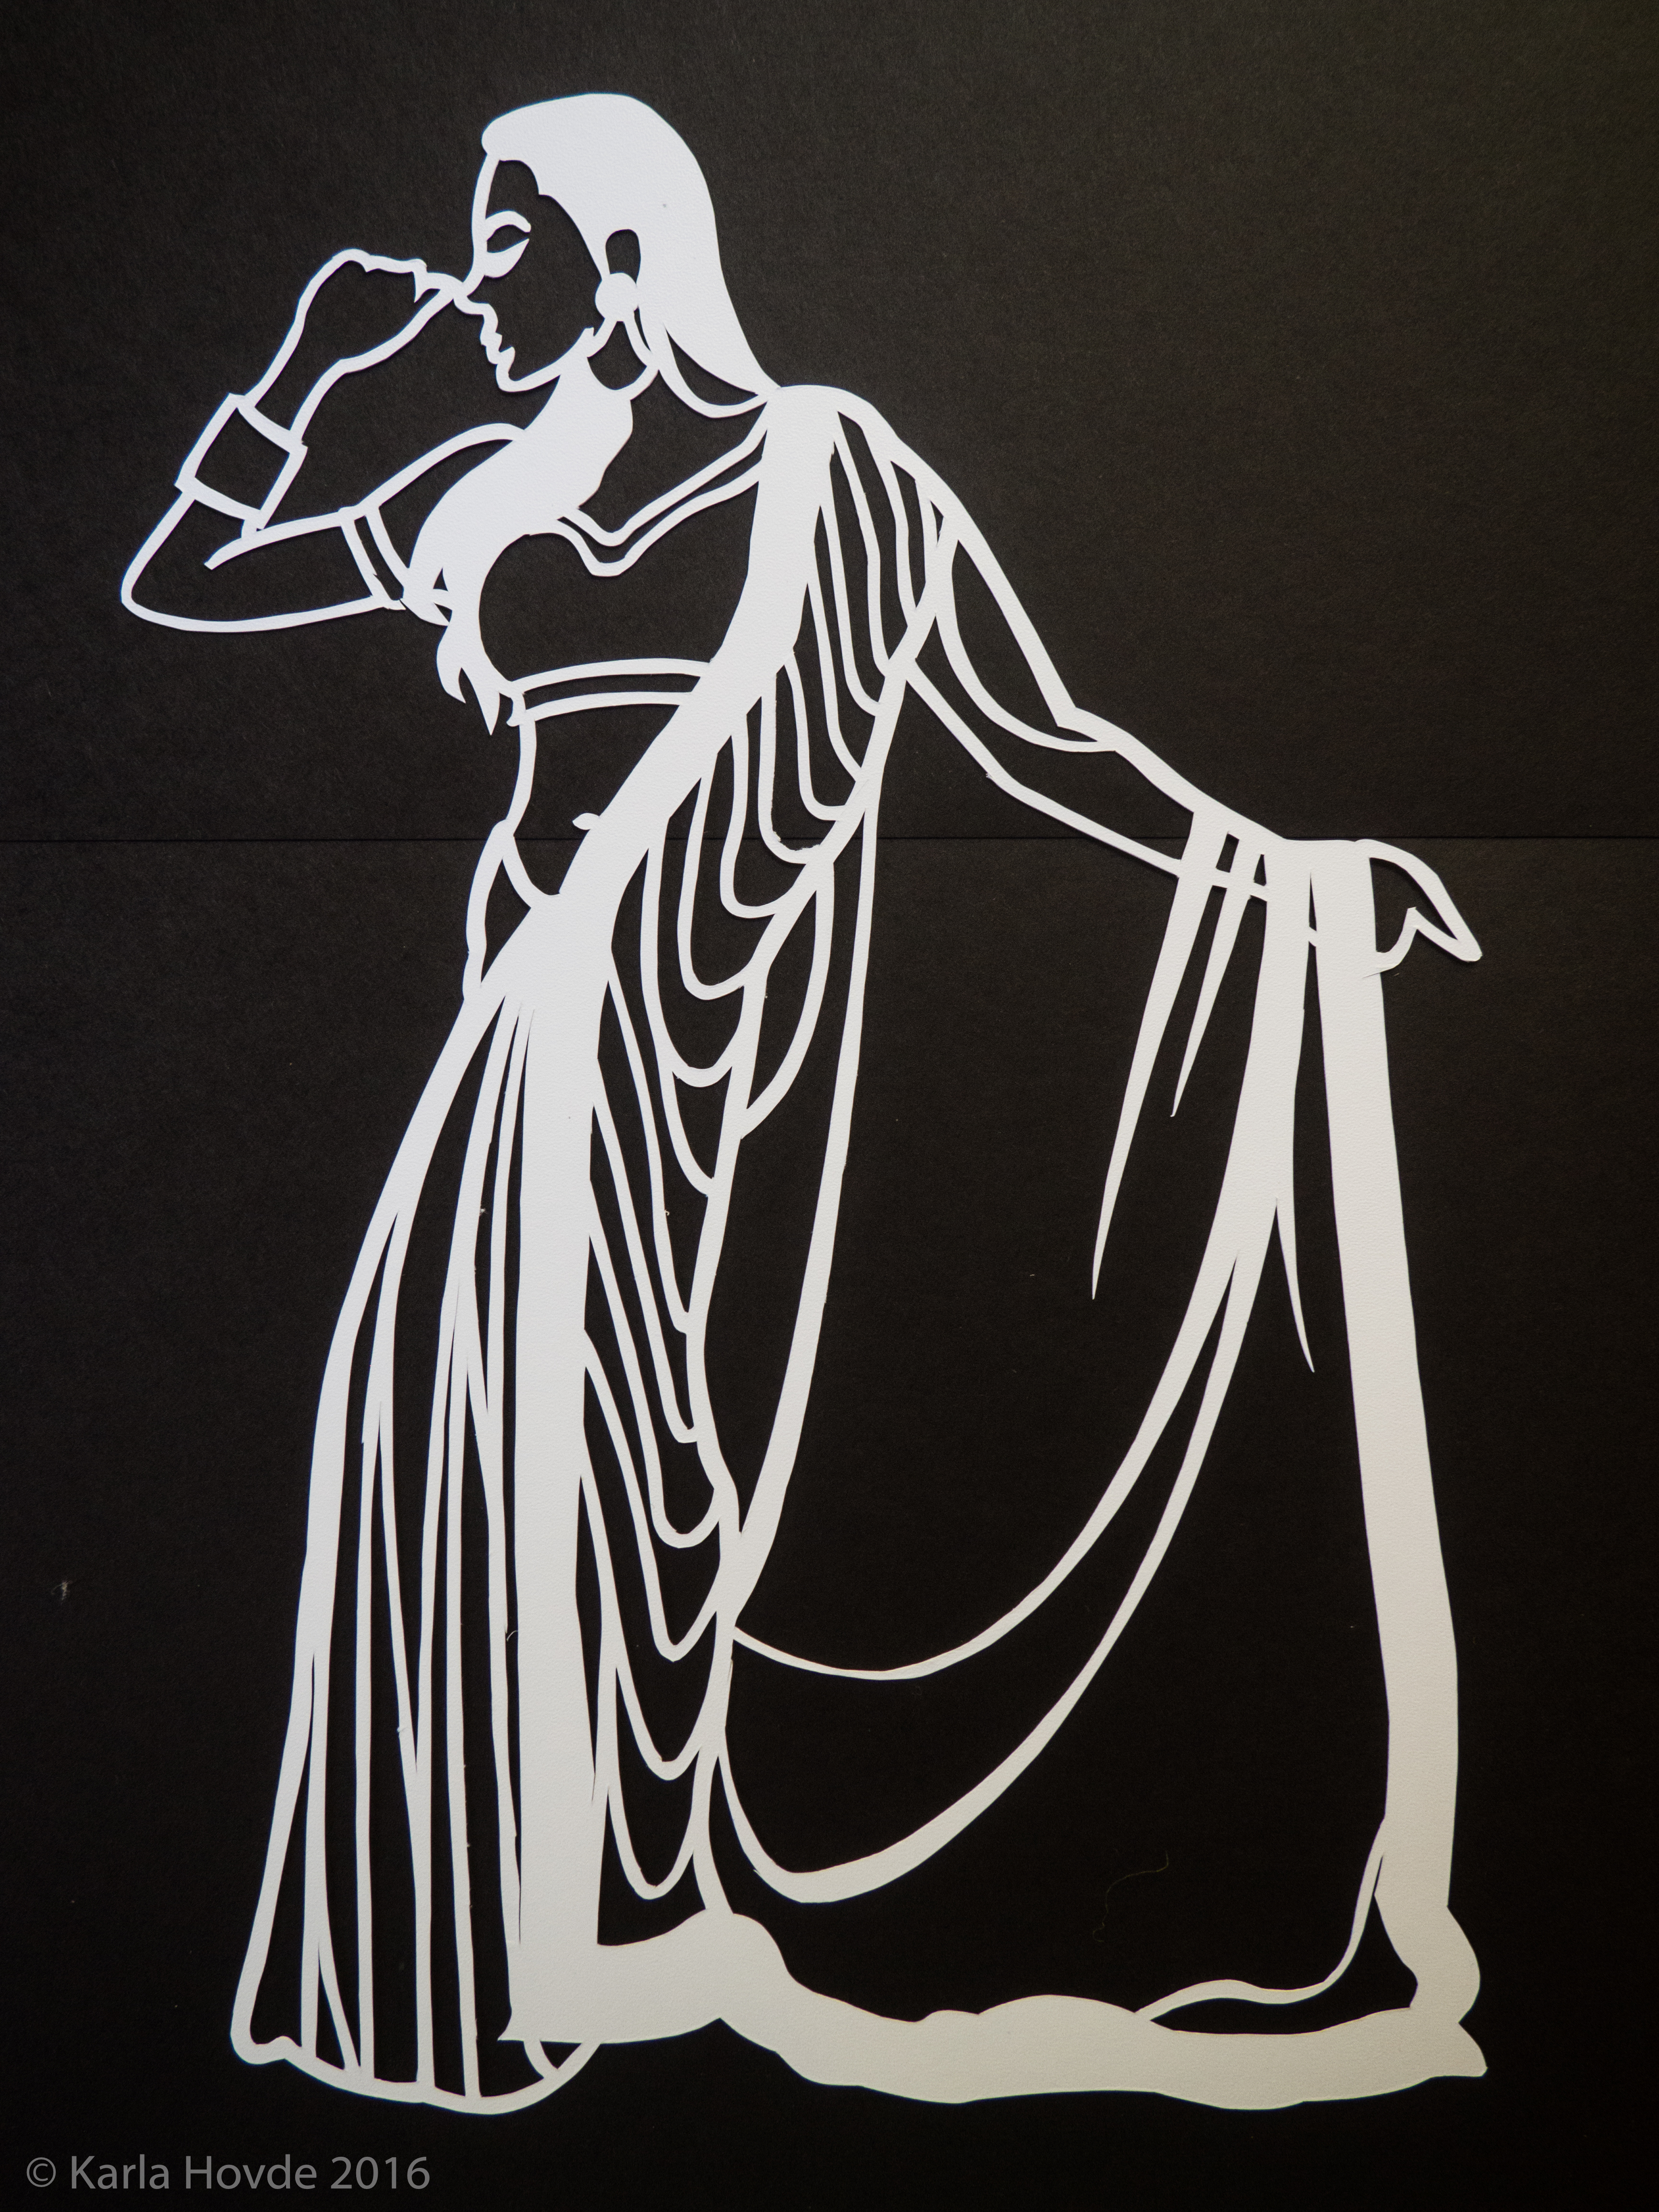 Paper cutting art in white paper shows stylized woman wearing a sari and dancing.